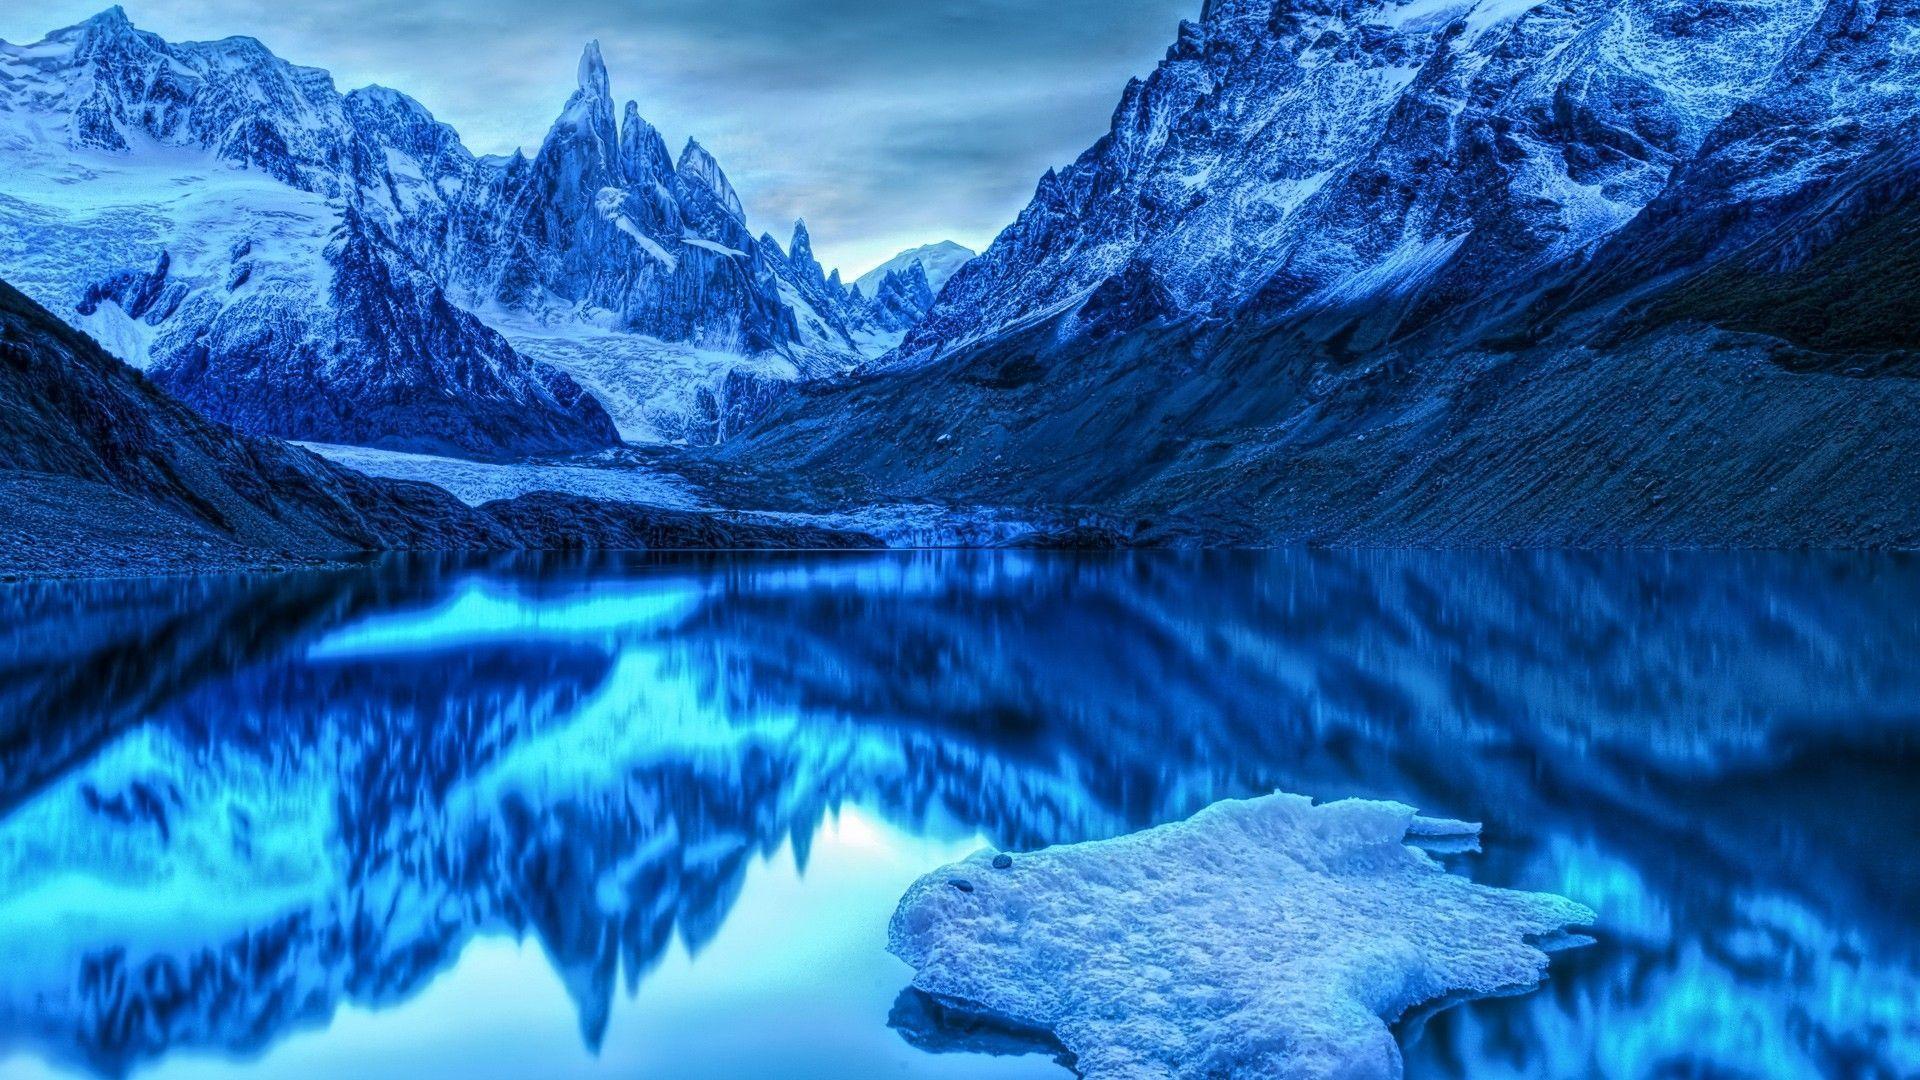 Lake In The Snowy Mountains Wallpapers 1920x1080 px Free Download